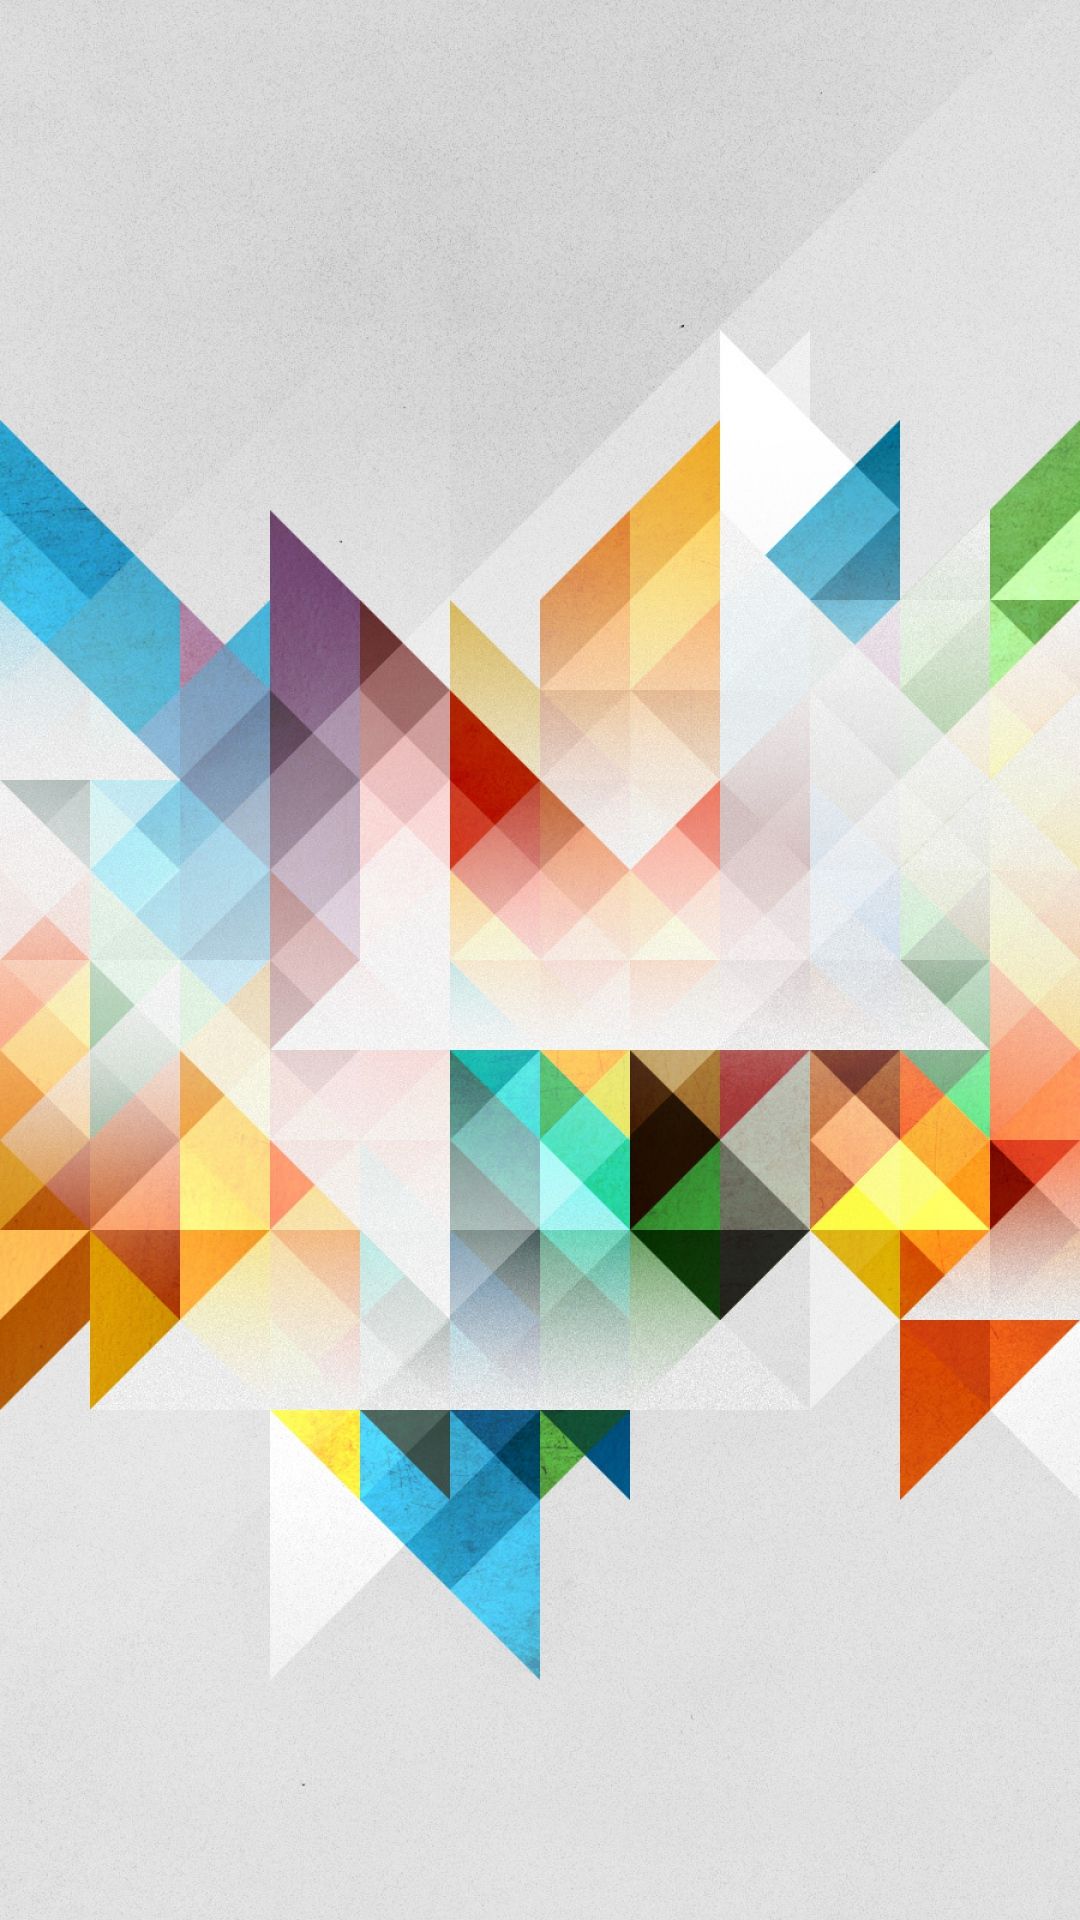 Download Wallpaper 1080x1920 Abstraction, Geometry, Shapes, Colors ...